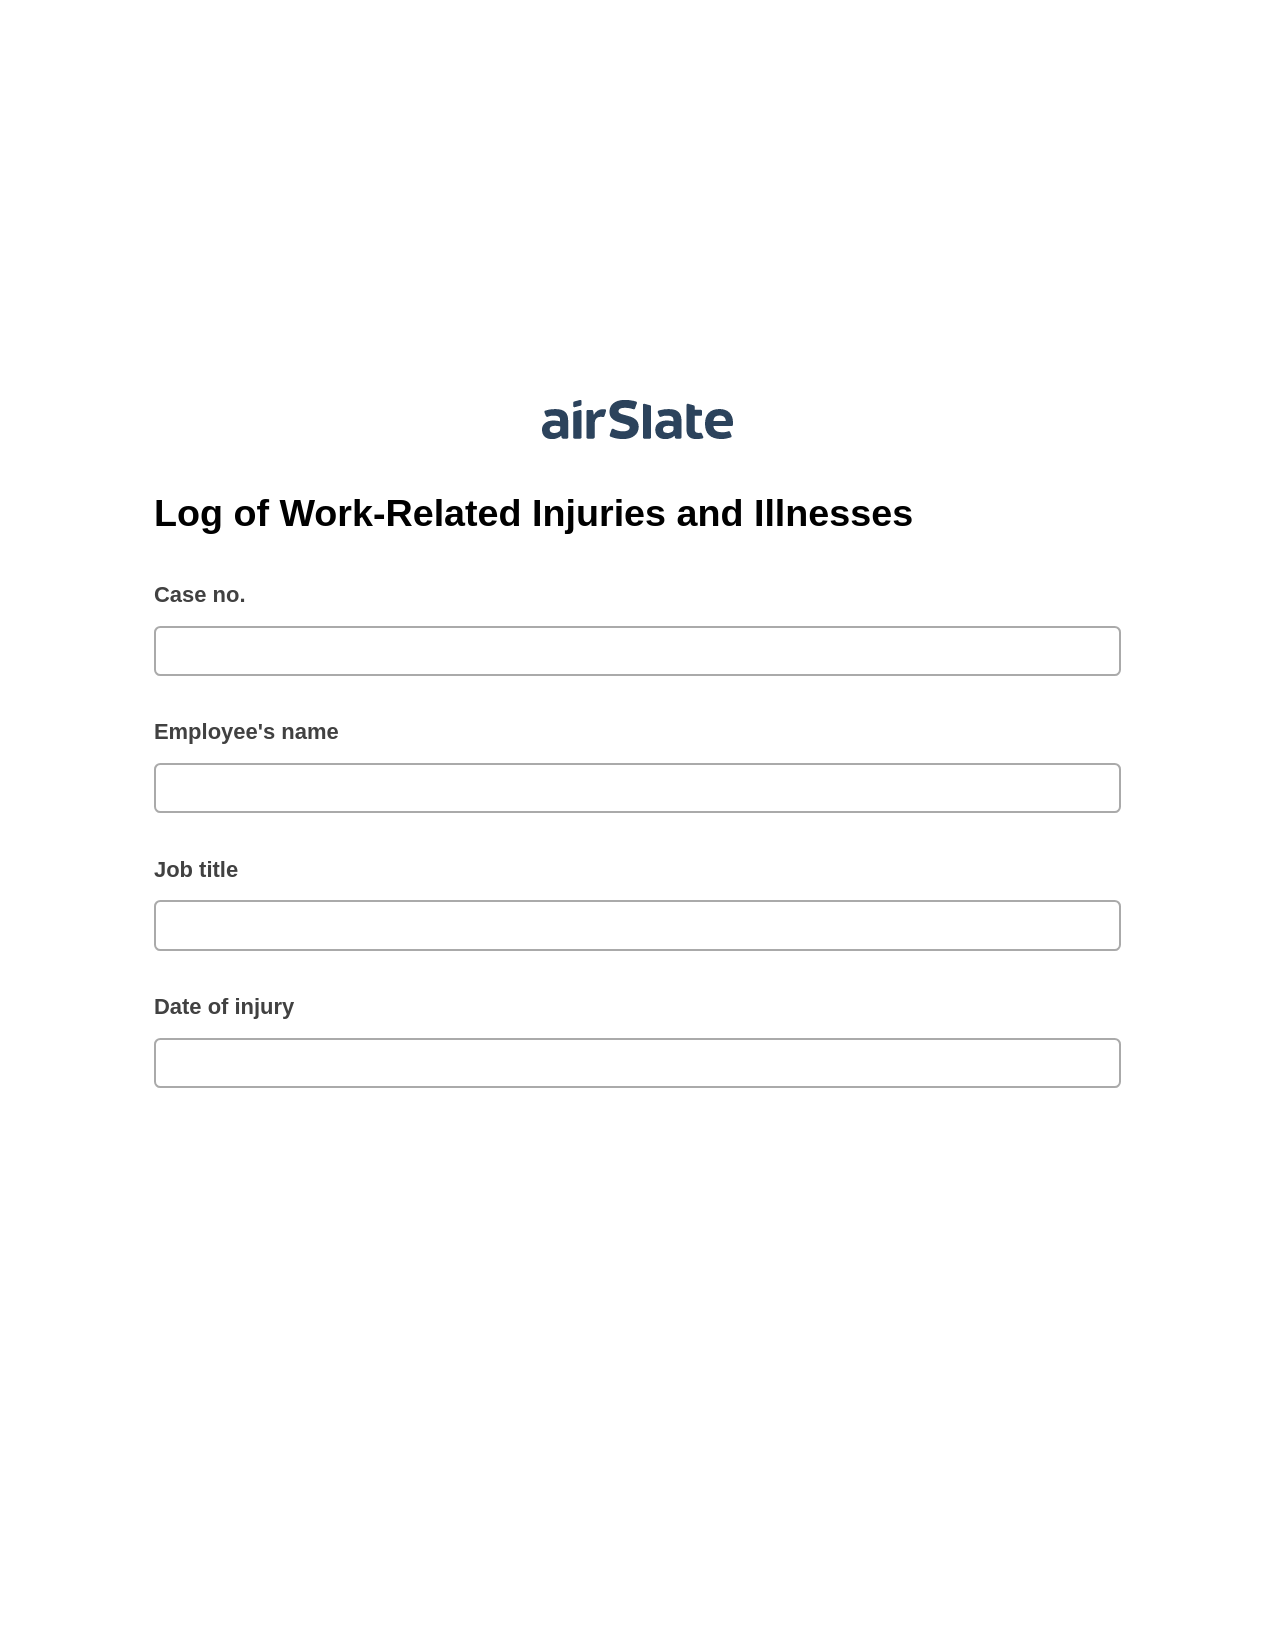 Multirole Log of Work-Related Injuries and Illnesses Pre-fill from MySQL Dropdown Options Bot, Set signature type addon, Export to Salesforce Bot